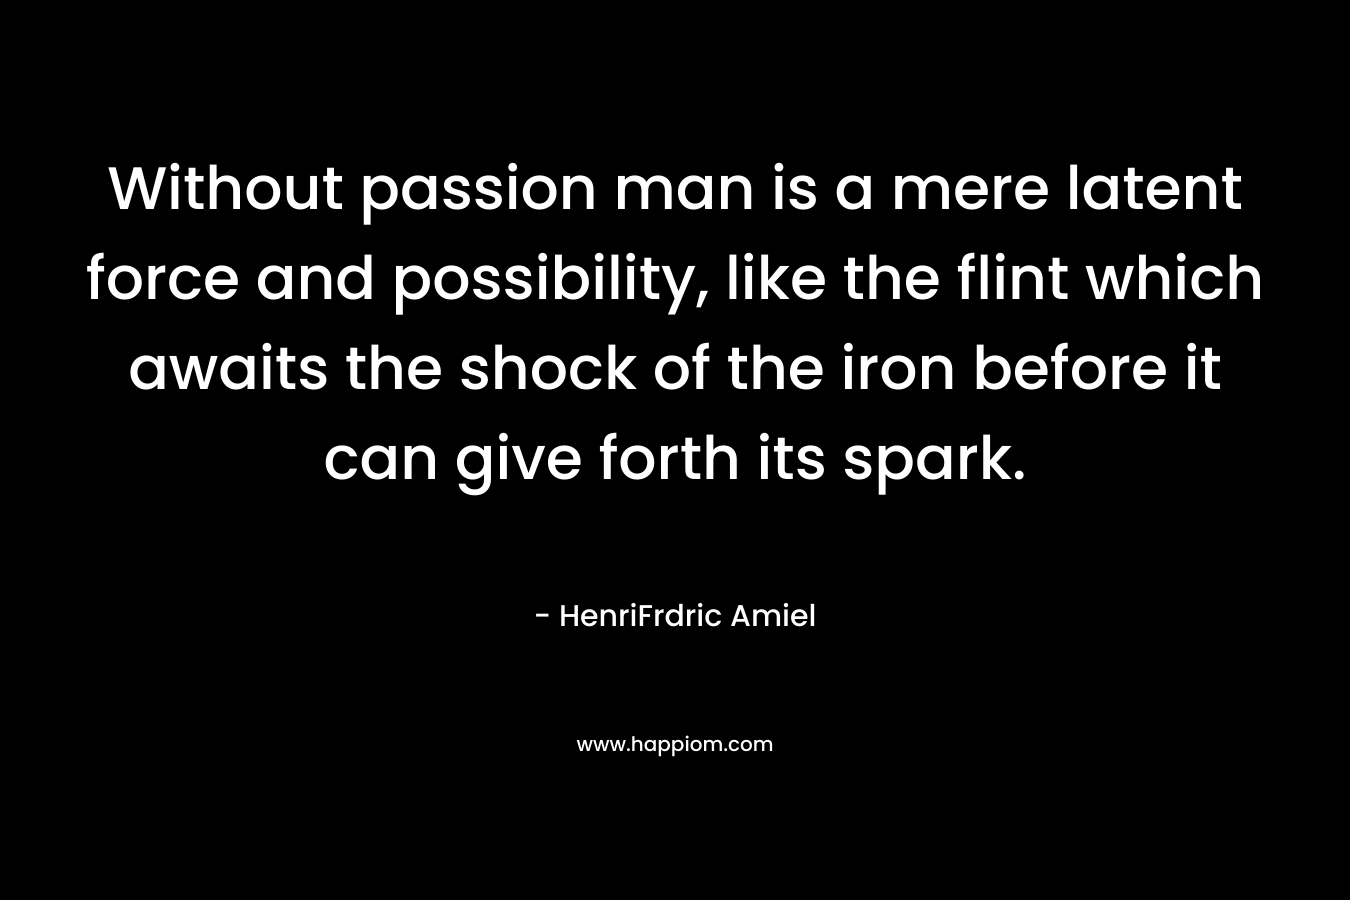 Without passion man is a mere latent force and possibility, like the flint which awaits the shock of the iron before it can give forth its spark. – HenriFrdric Amiel